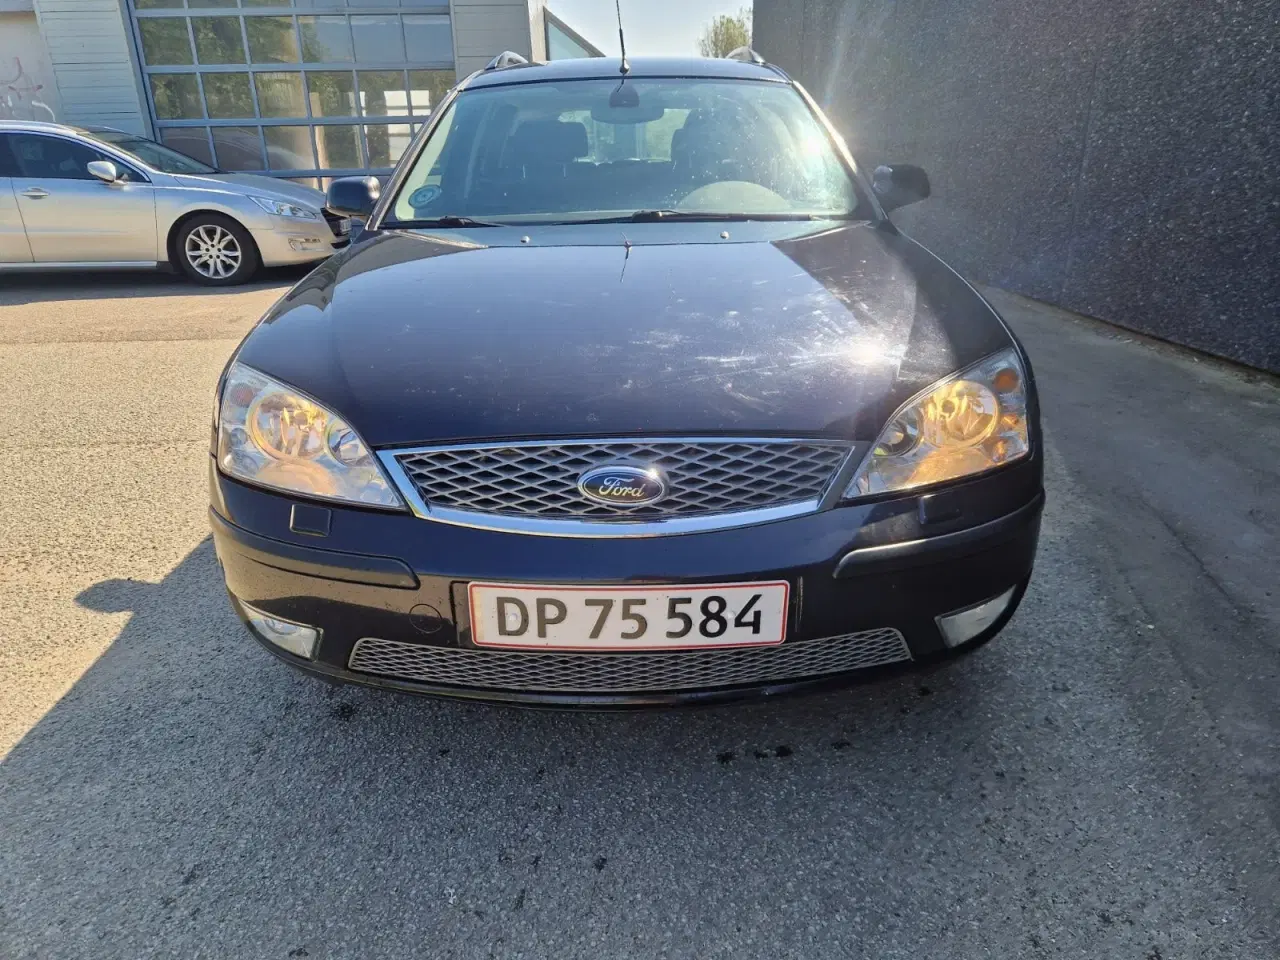 Billede 3 - Ford Mondeo 1,8 Trend stc.